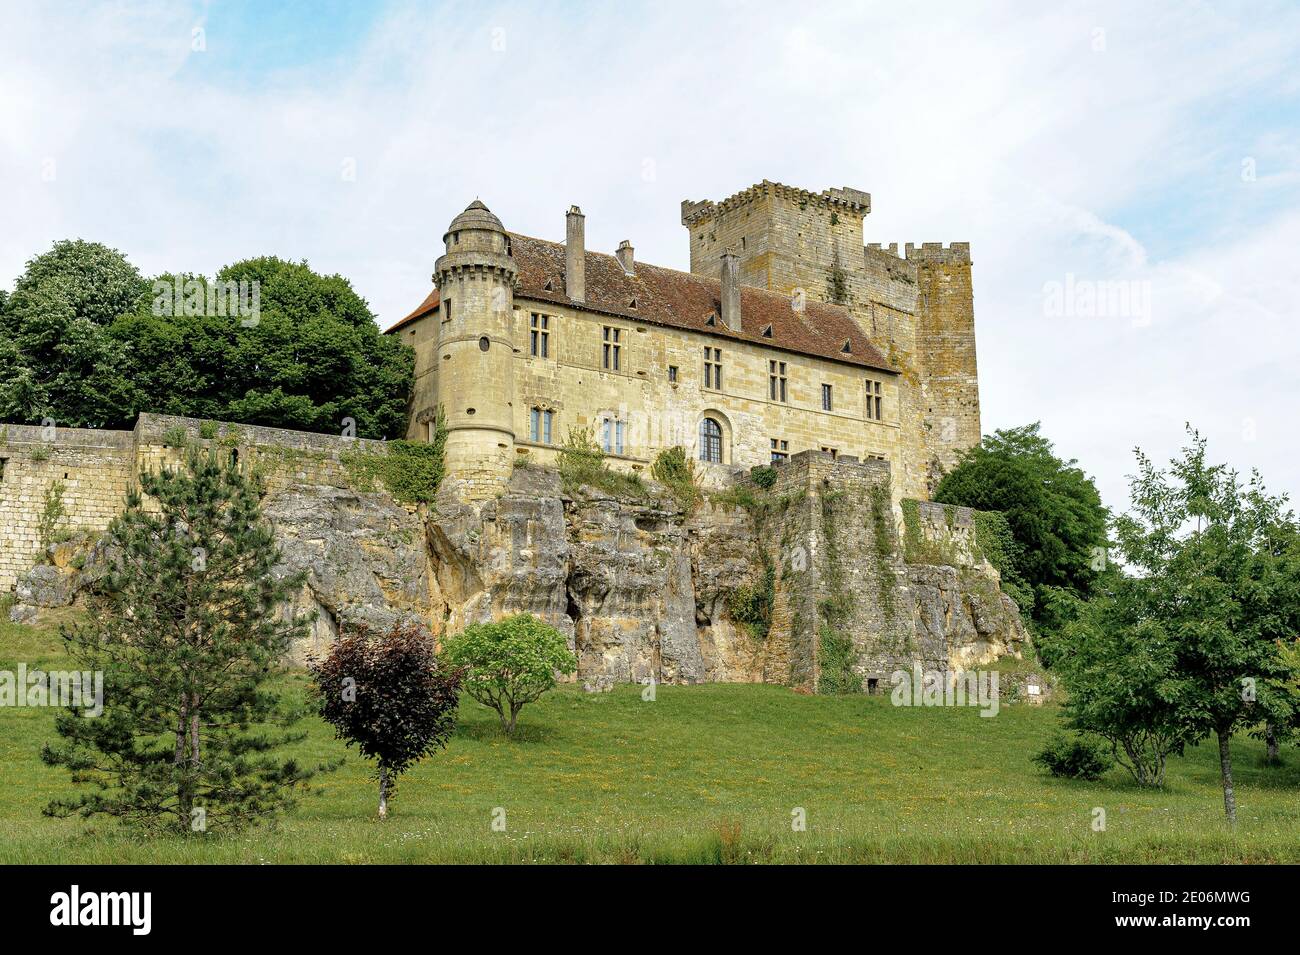 The castle of Excideuil, in the Périgord region of France, is perched on a rocky cliff. The yellow stone contrasts with the blue of the sky. Stock Photo